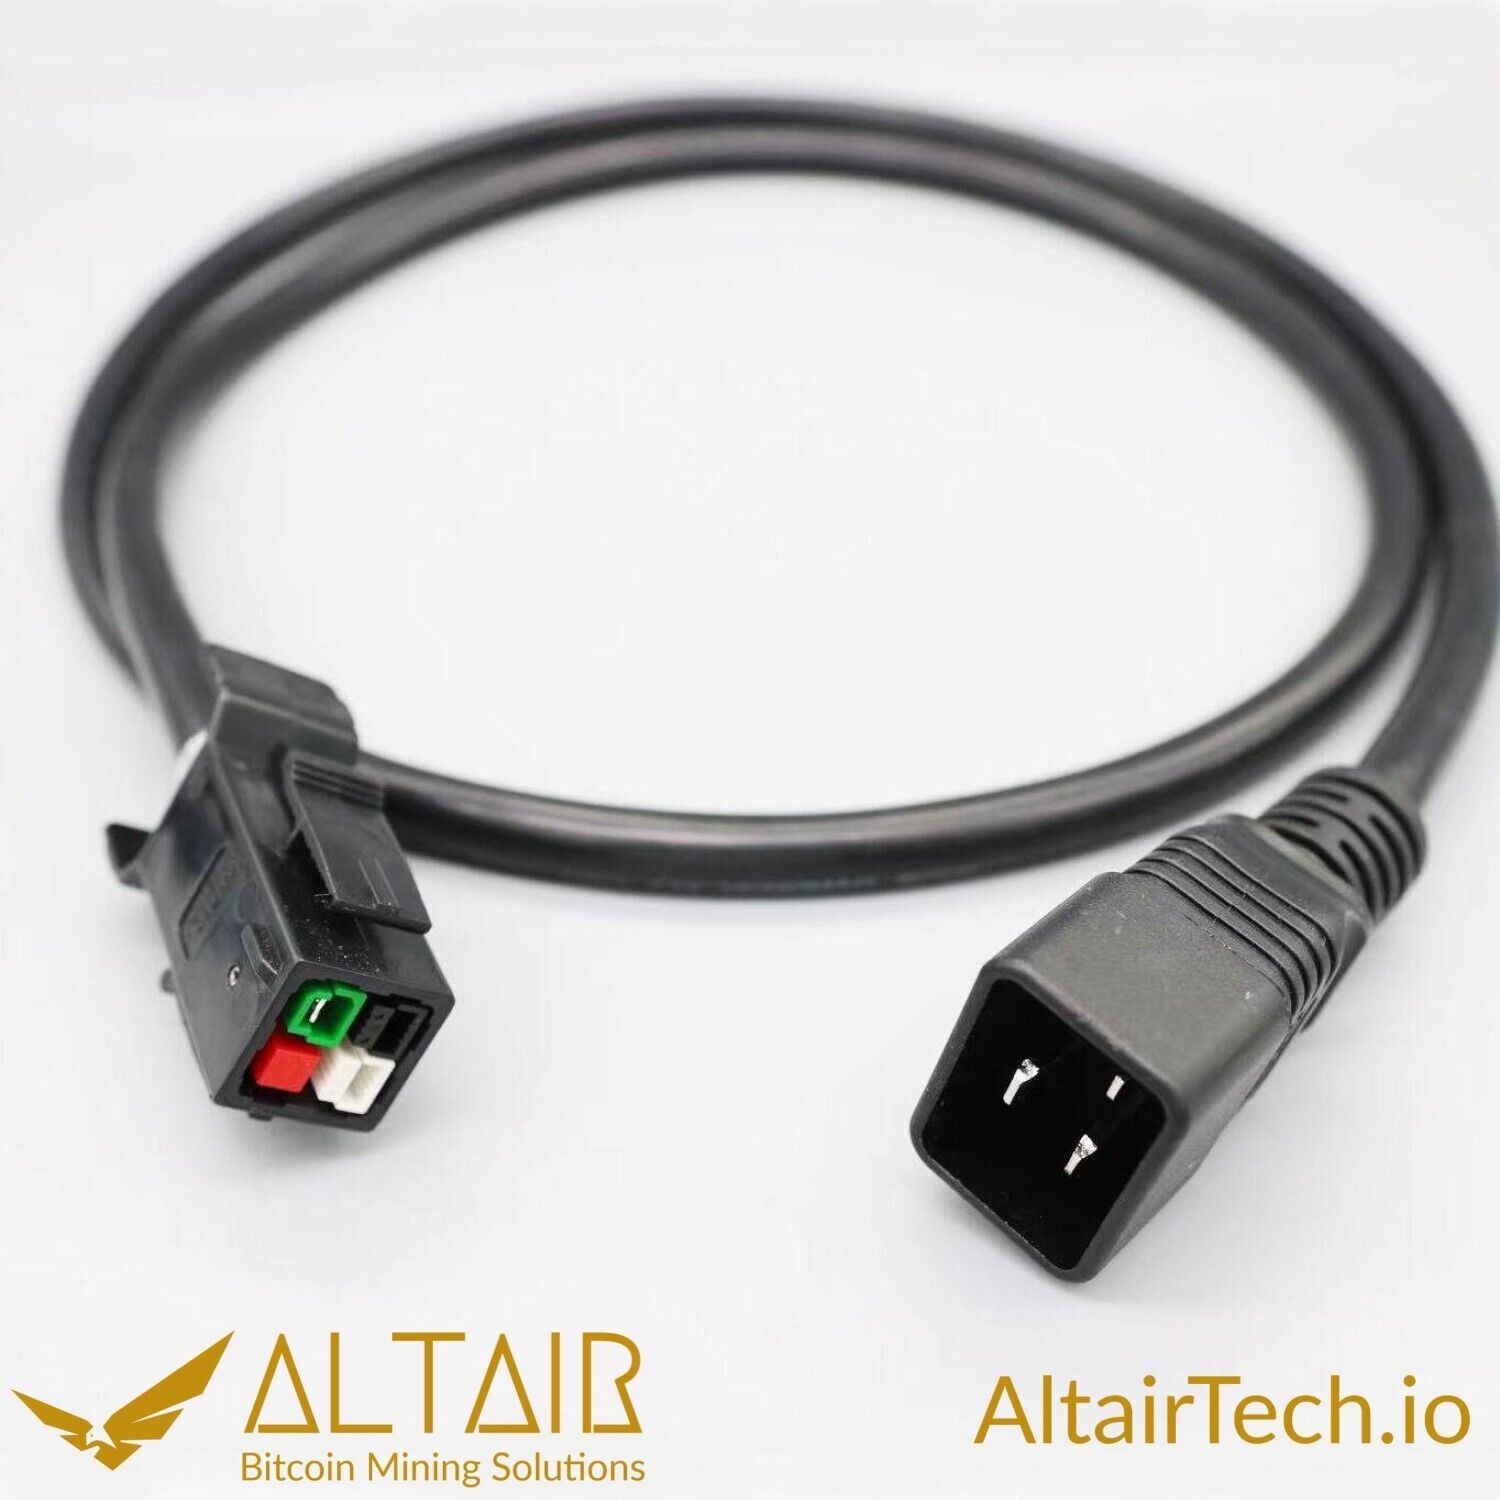 AltairTech.io IEC C20 to P13 Heavy Duty Power Cord, 3 ft, 12 AWG, 20A